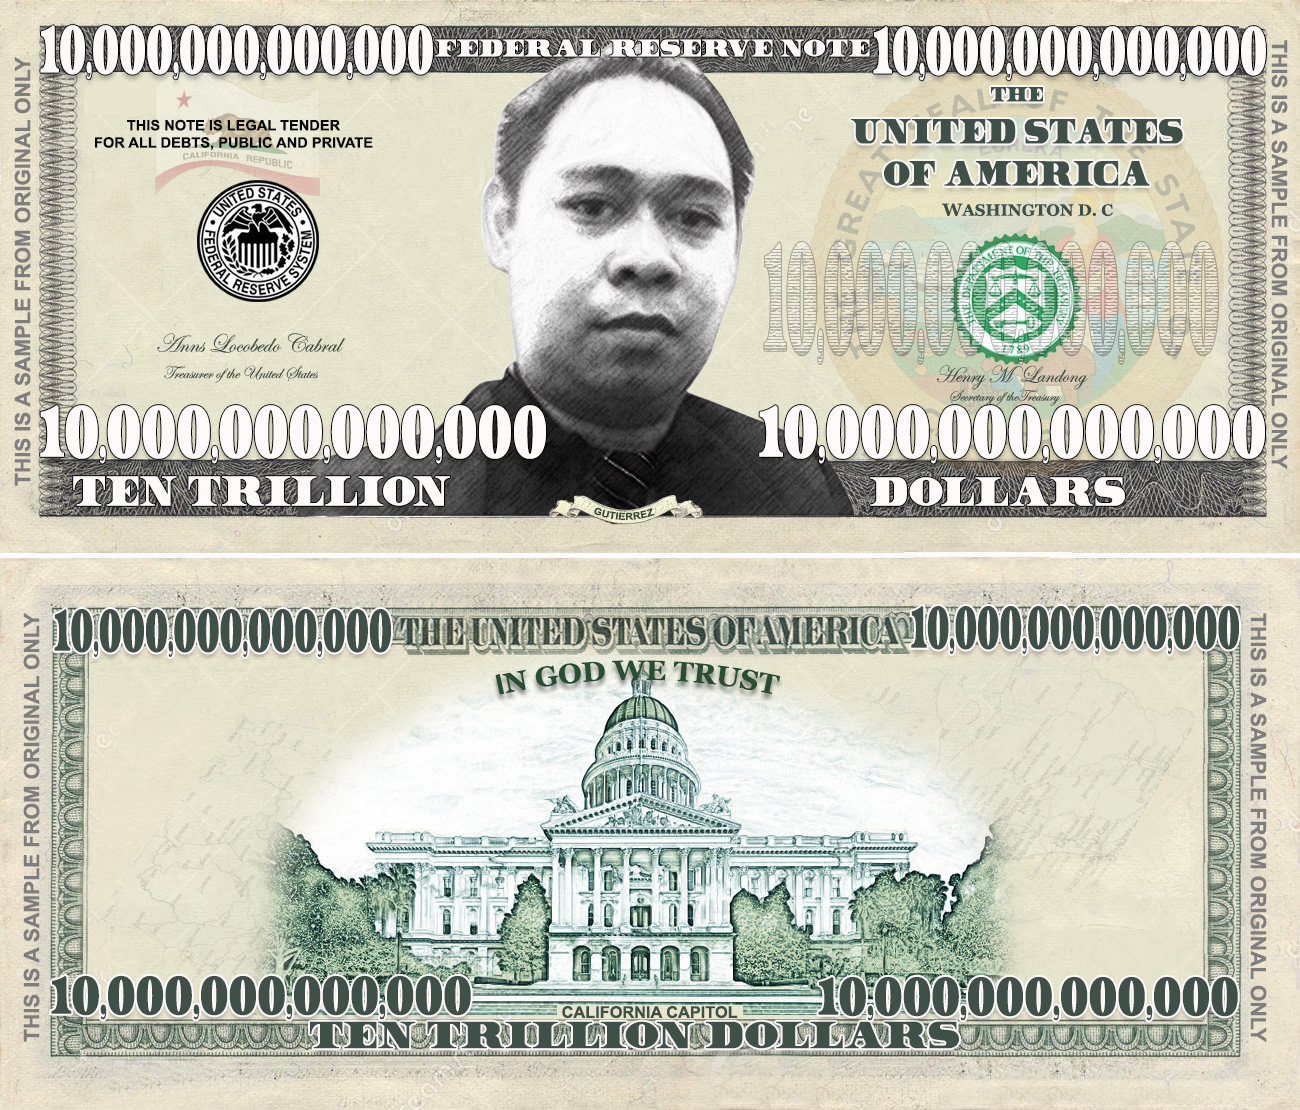 10-trillion-dollars-banknote-of-usa-2-sample-only.jpg